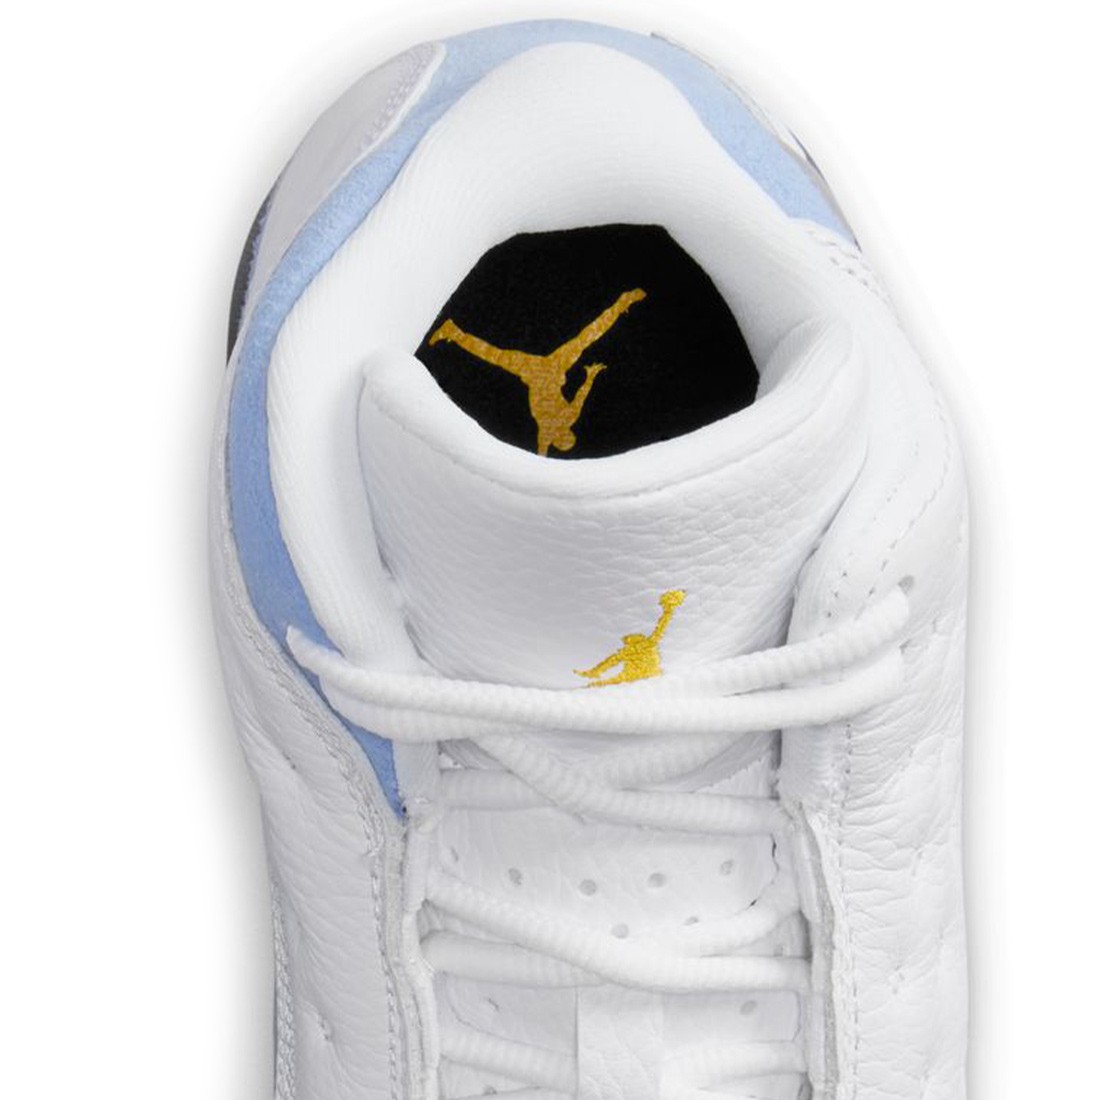 Air Jordan lightning-bolt graphic is screen printed onto the front